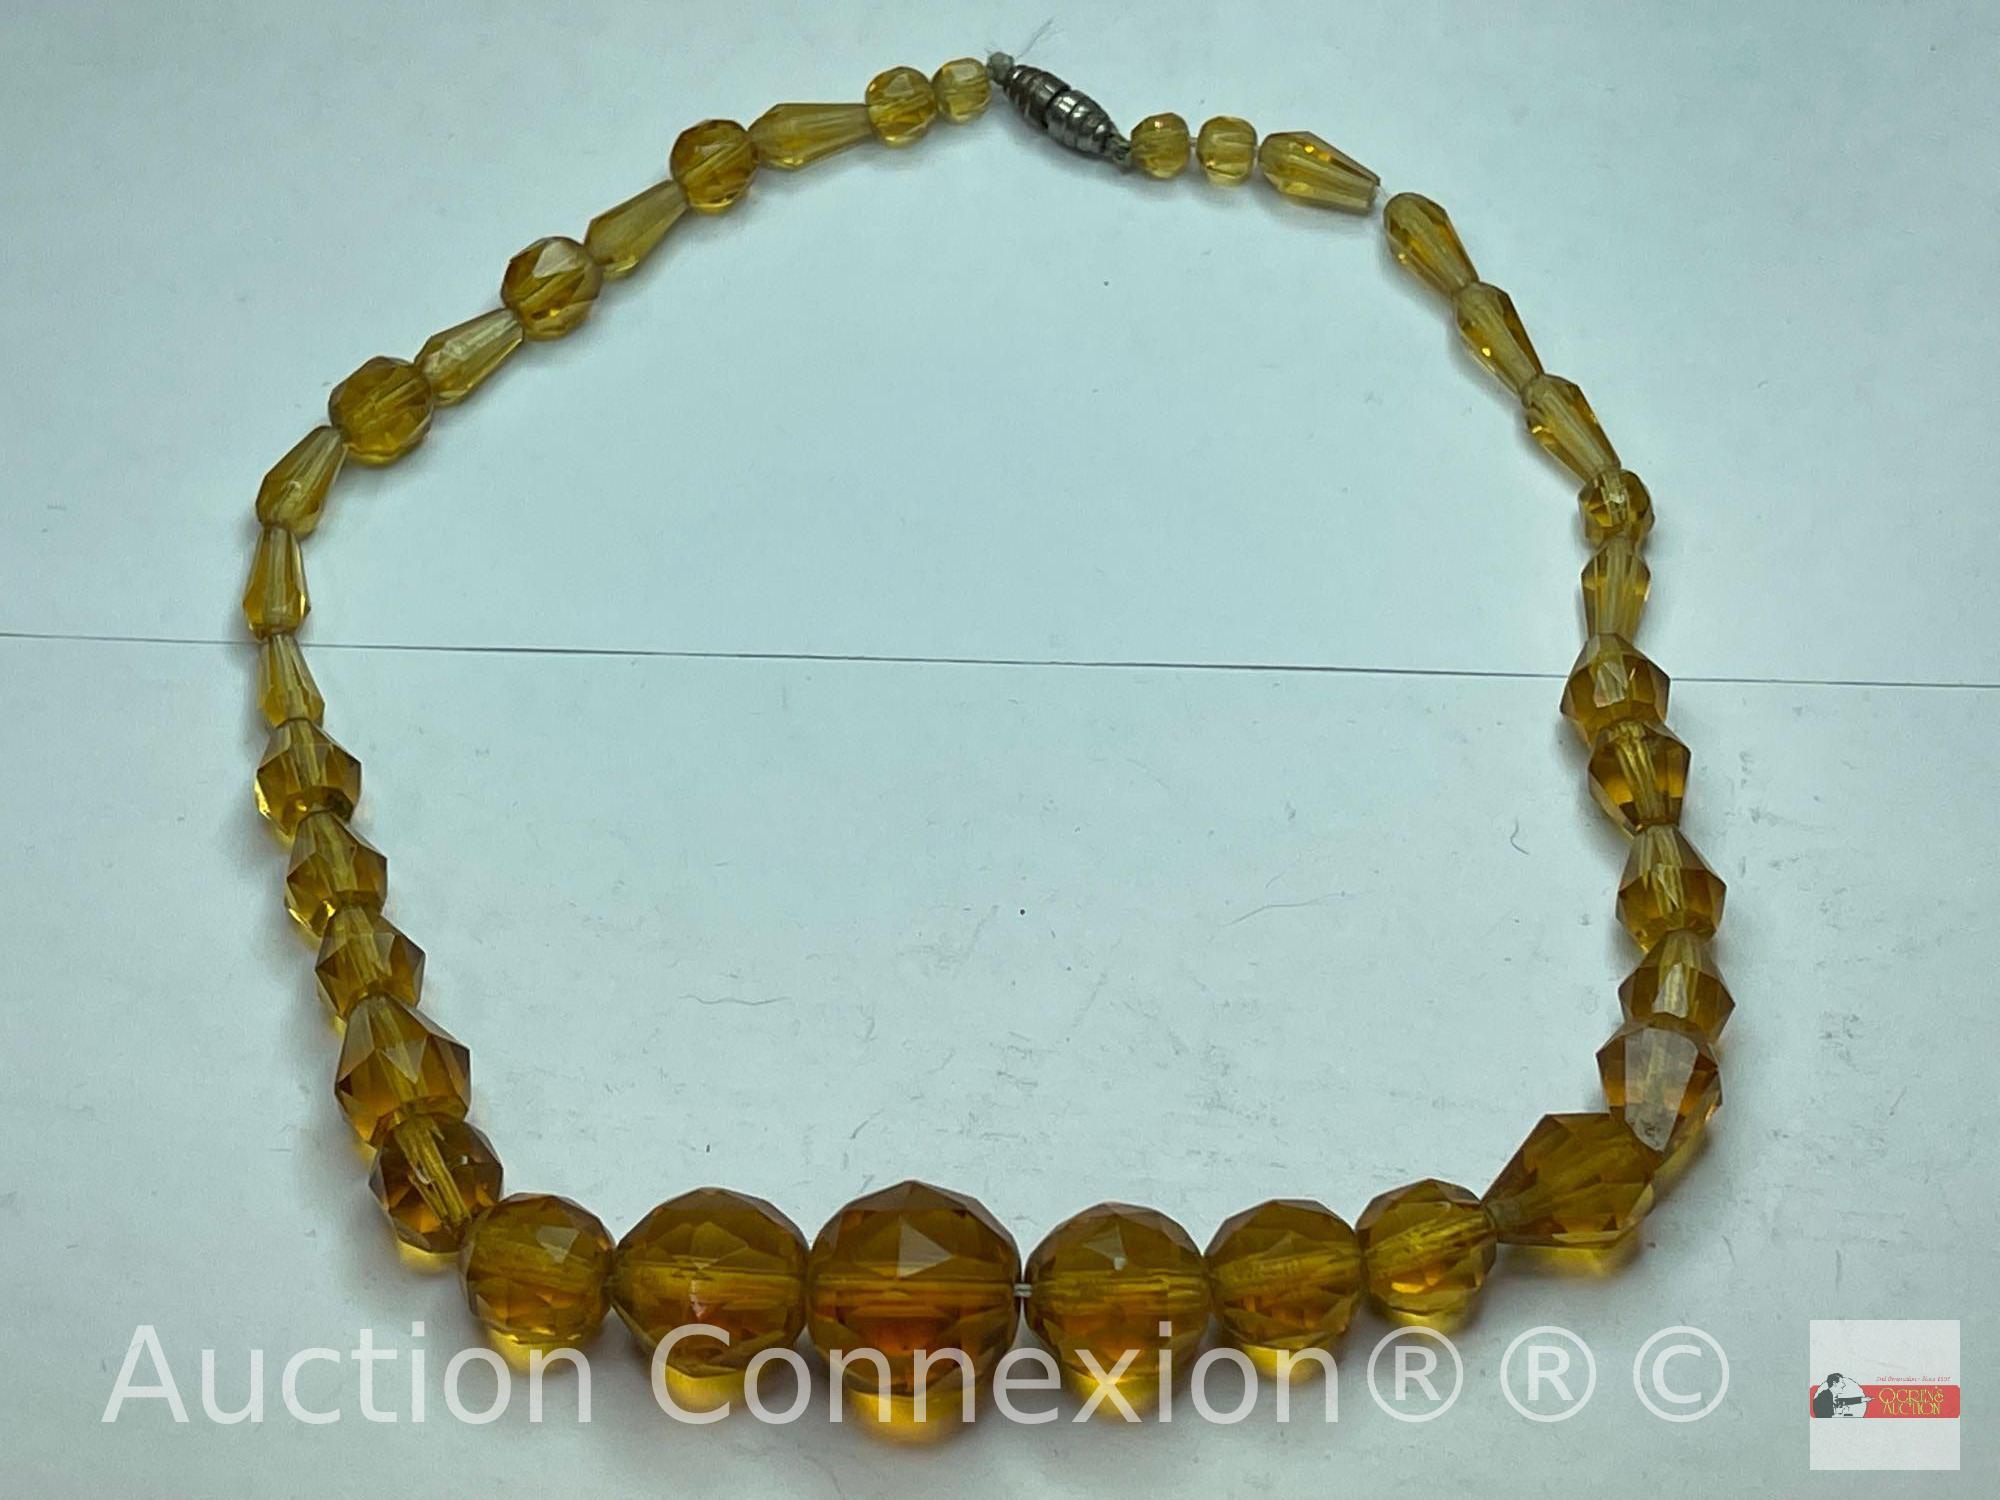 Jewelry - Necklace, 7" Victorian amber glass beaded necklace